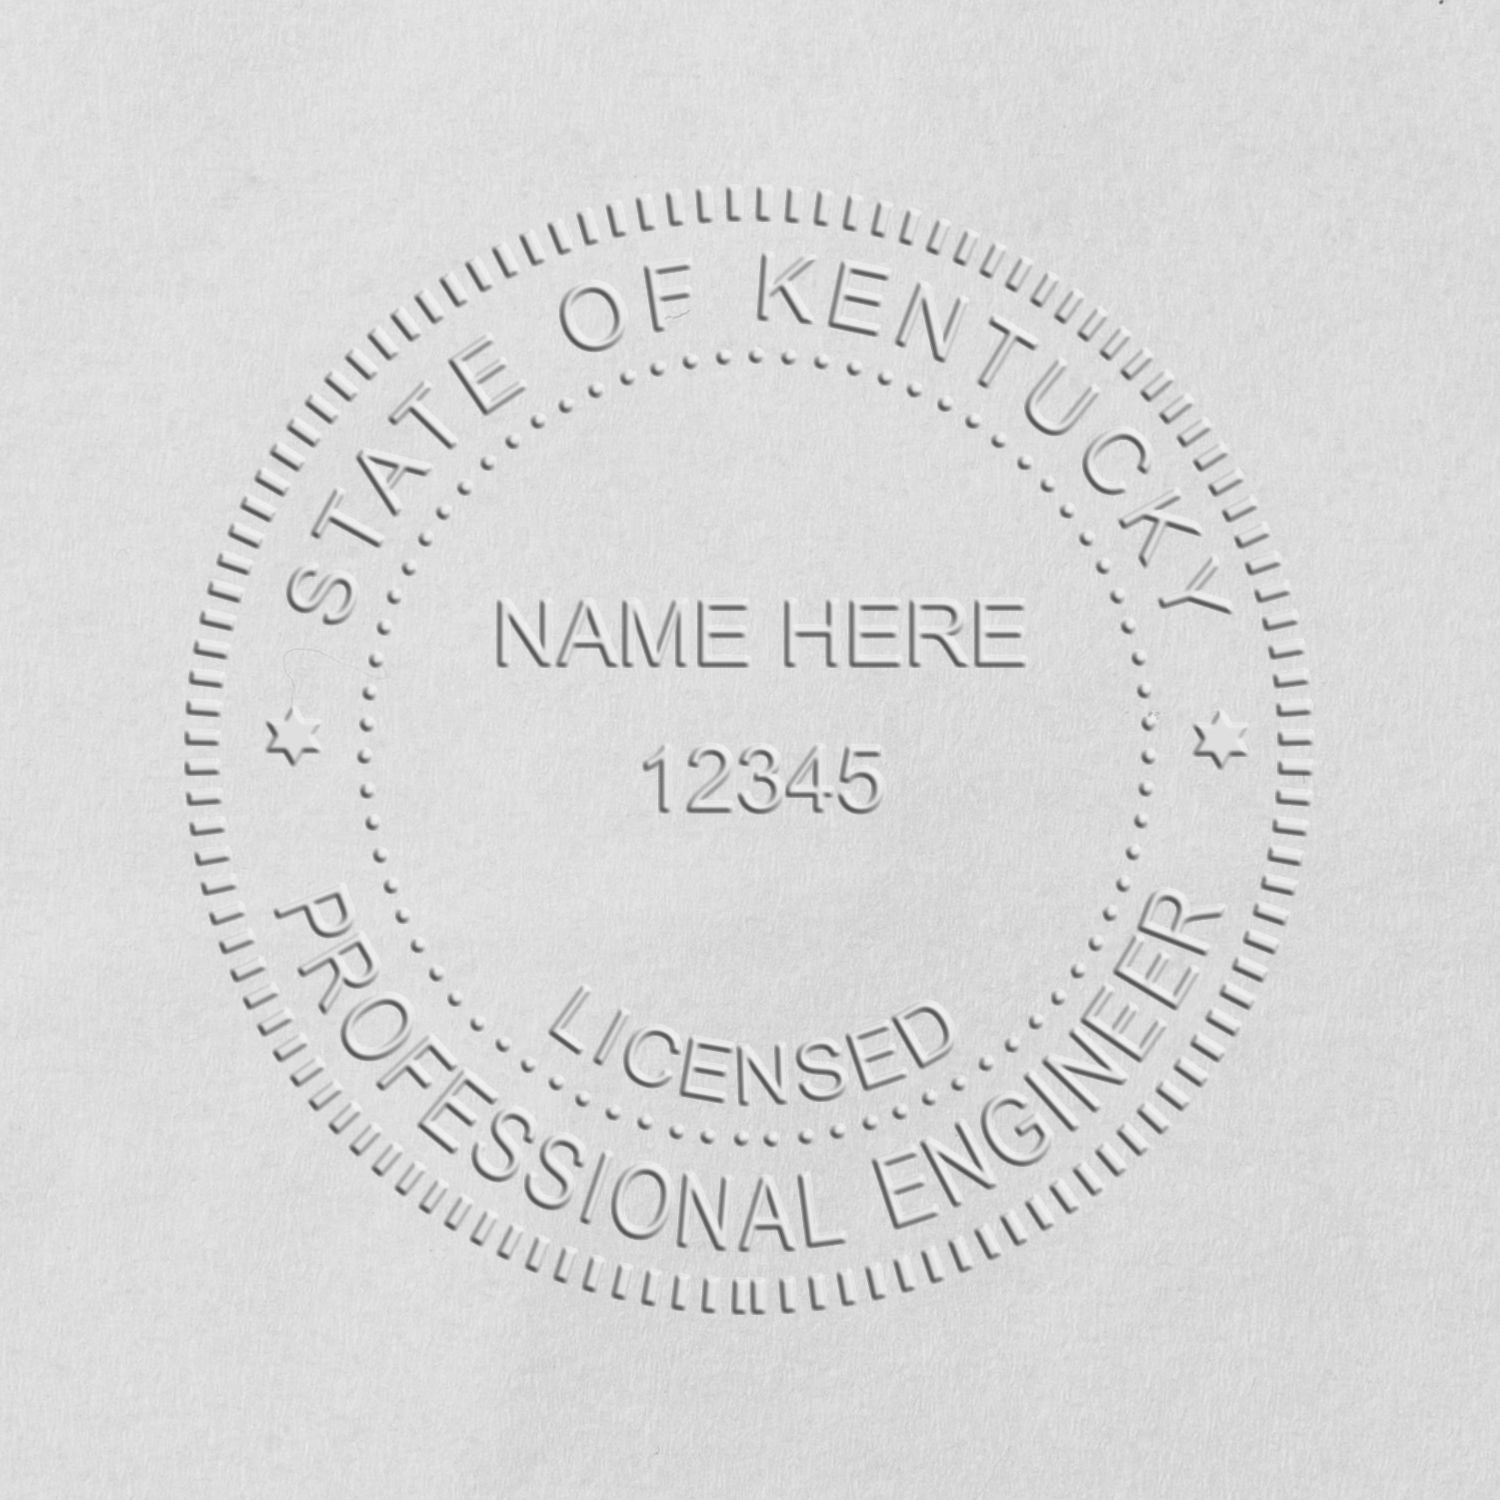 An alternative view of the State of Kentucky Extended Long Reach Engineer Seal stamped on a sheet of paper showing the image in use